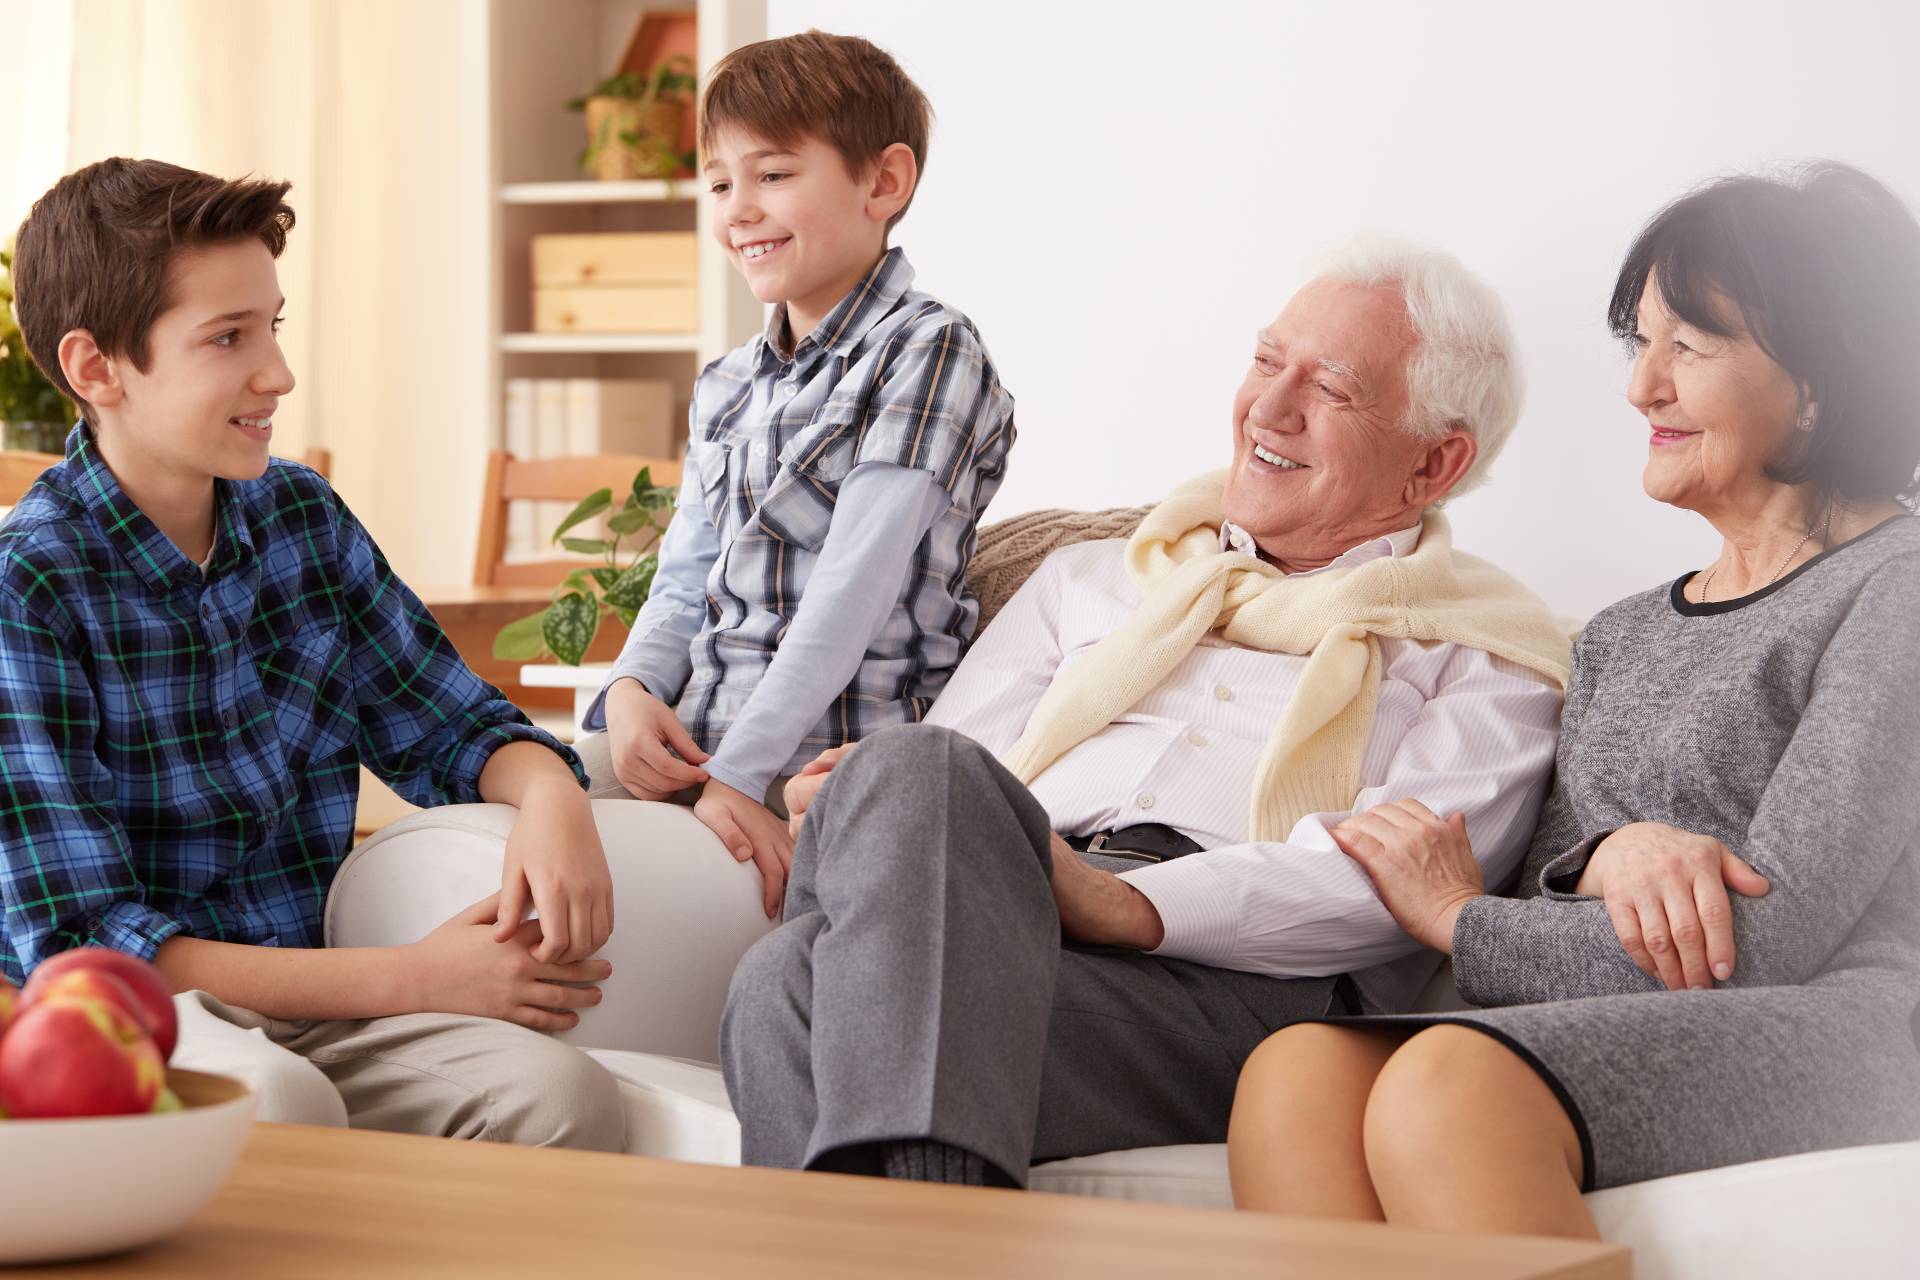 Grandparent Custody and Visitation Rights in Fresno: Subcategories and Legal Considerations